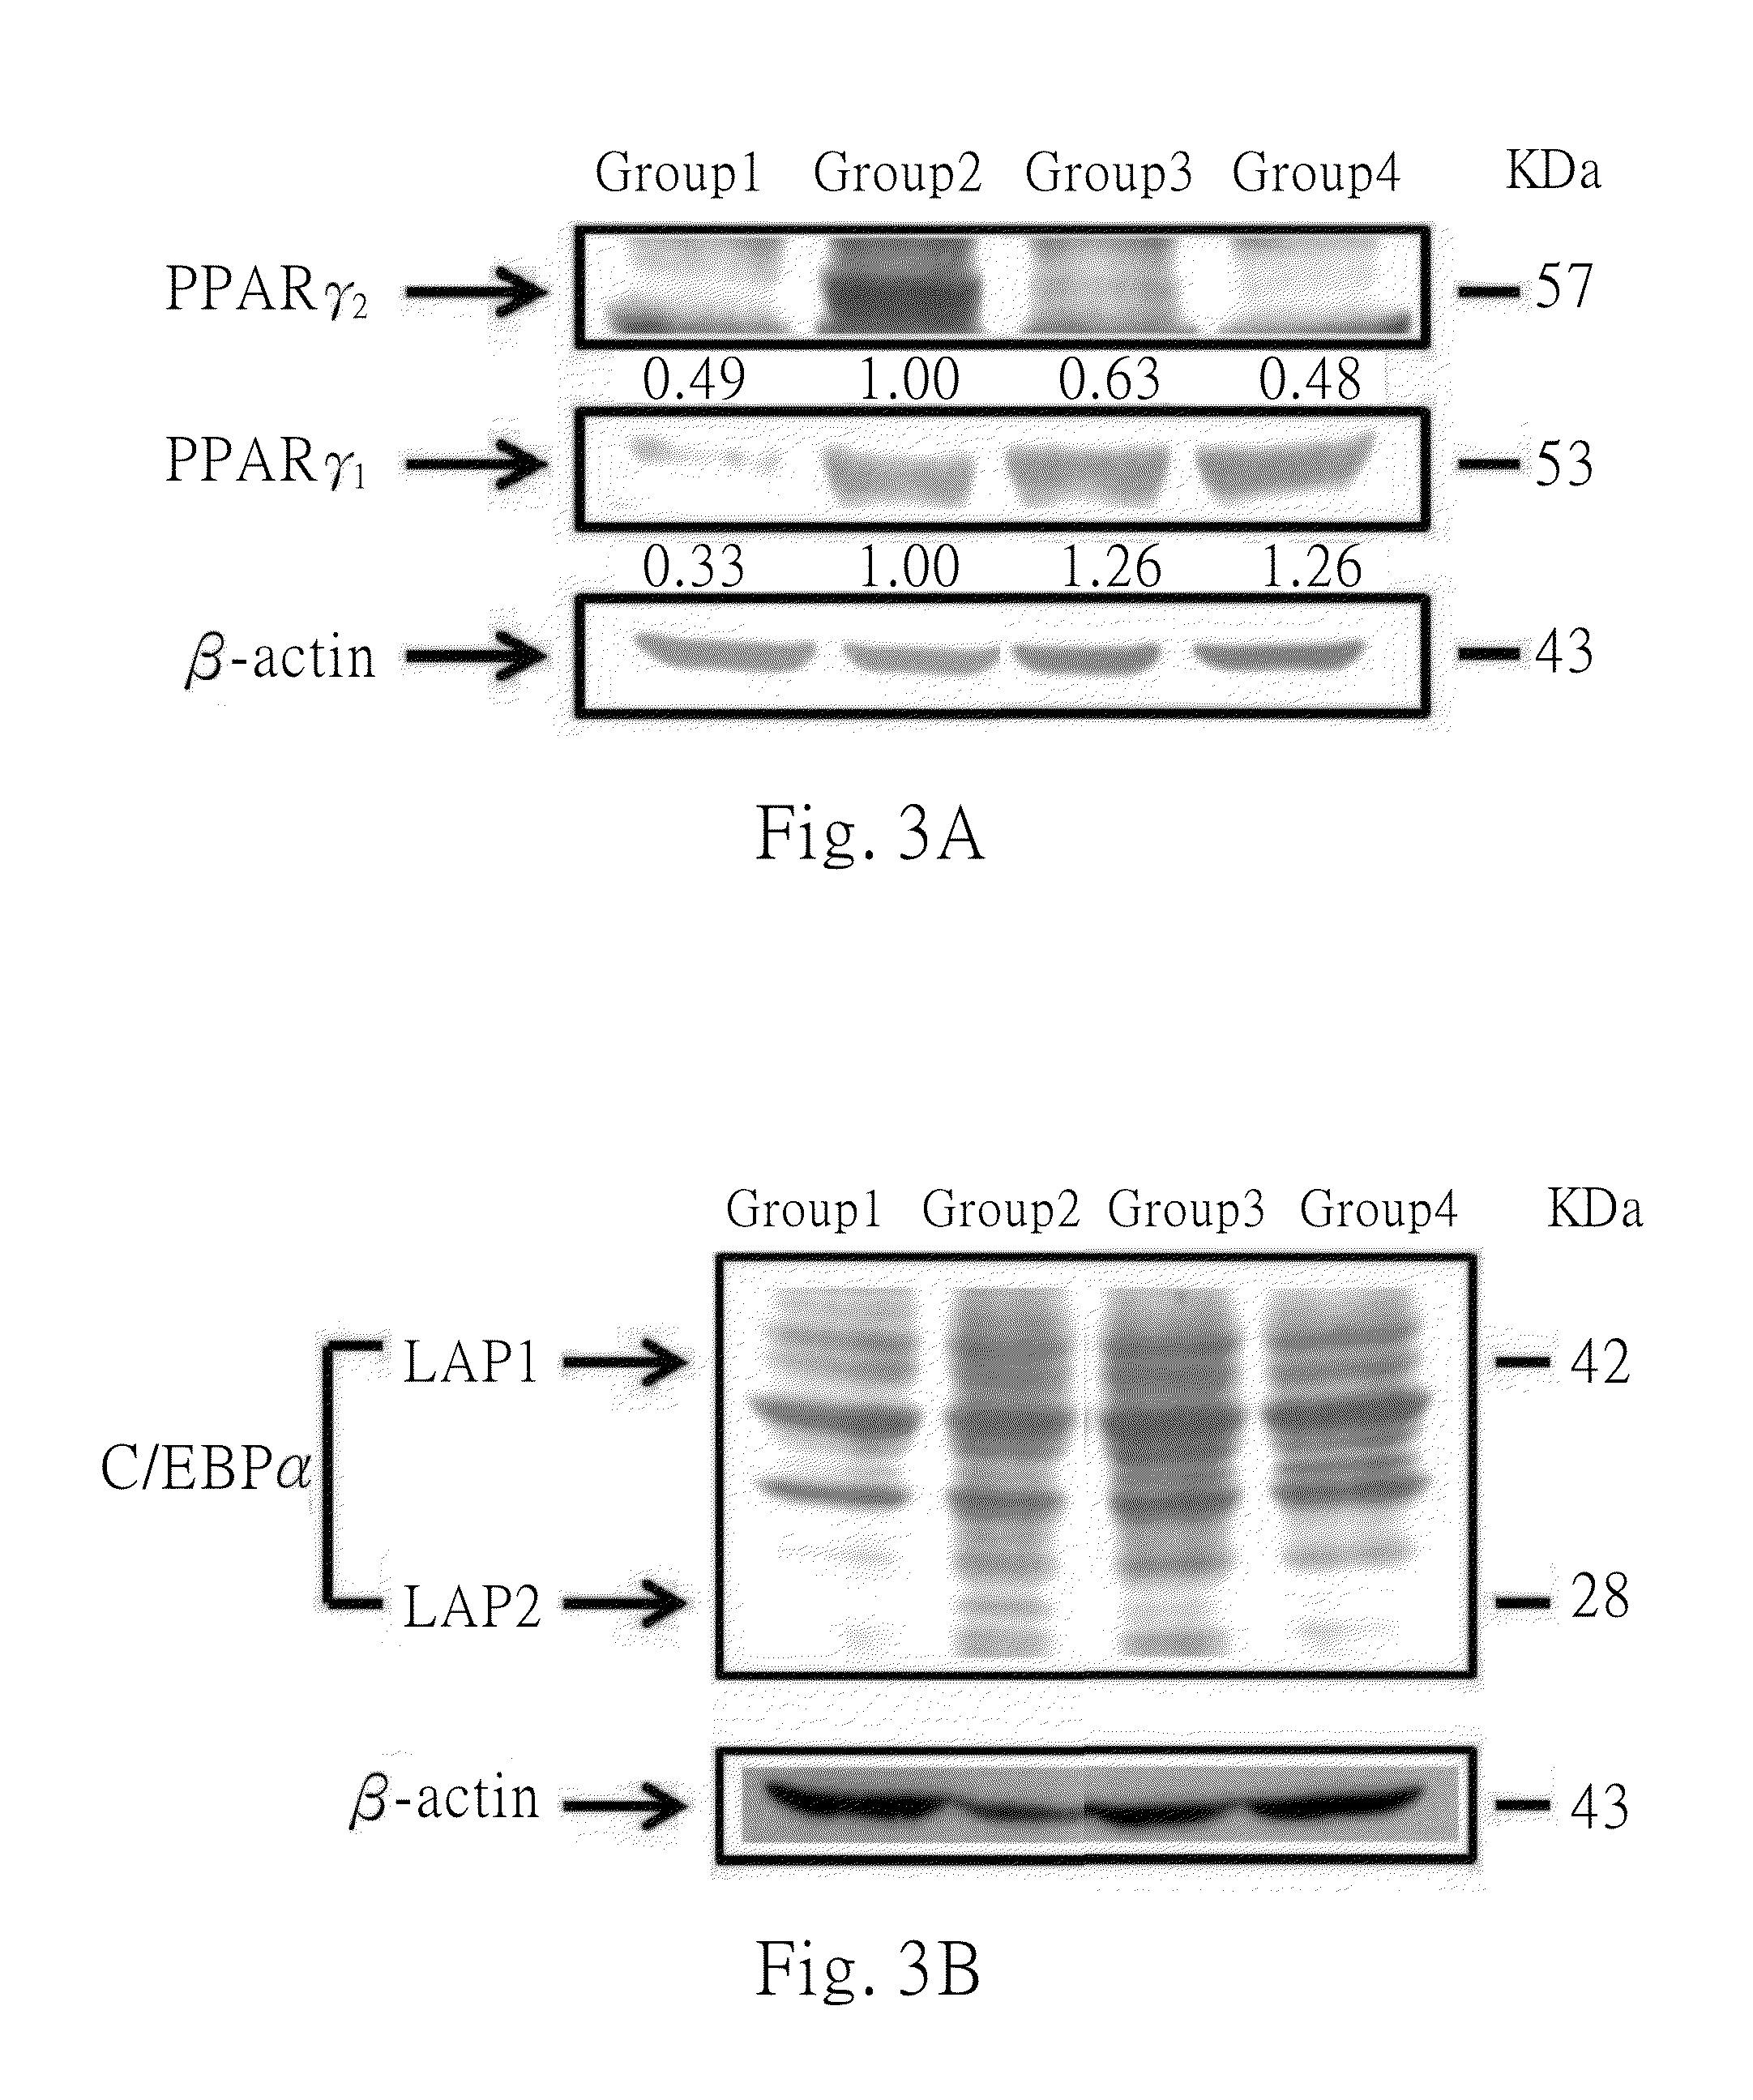 Uses of hydroxyl polymethoxylflavones (HPMFs) and derivatives thereof